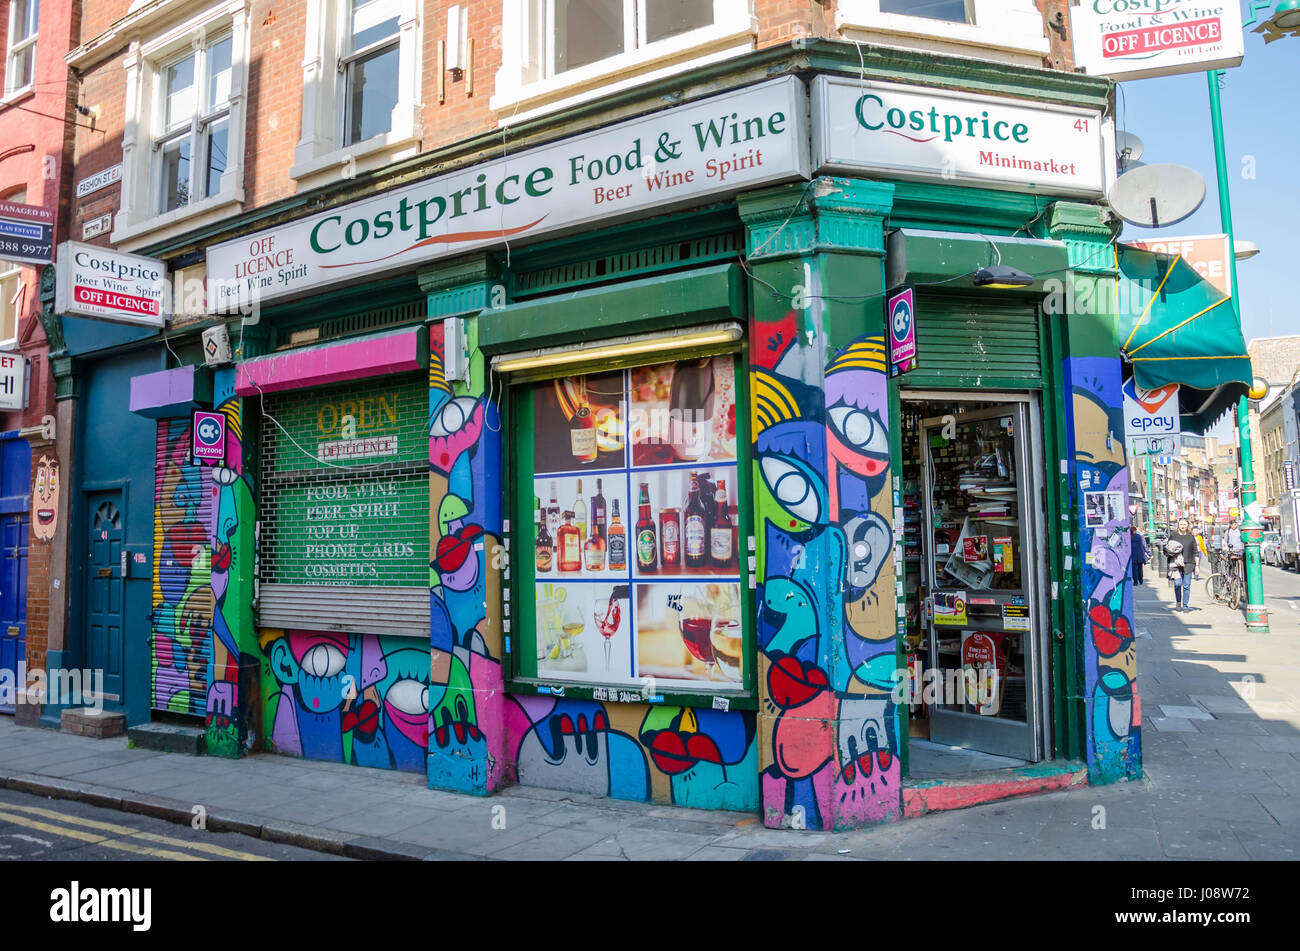 The Costprice convenience store on Brick Lane is decorated with colourful street art. Stock Photo